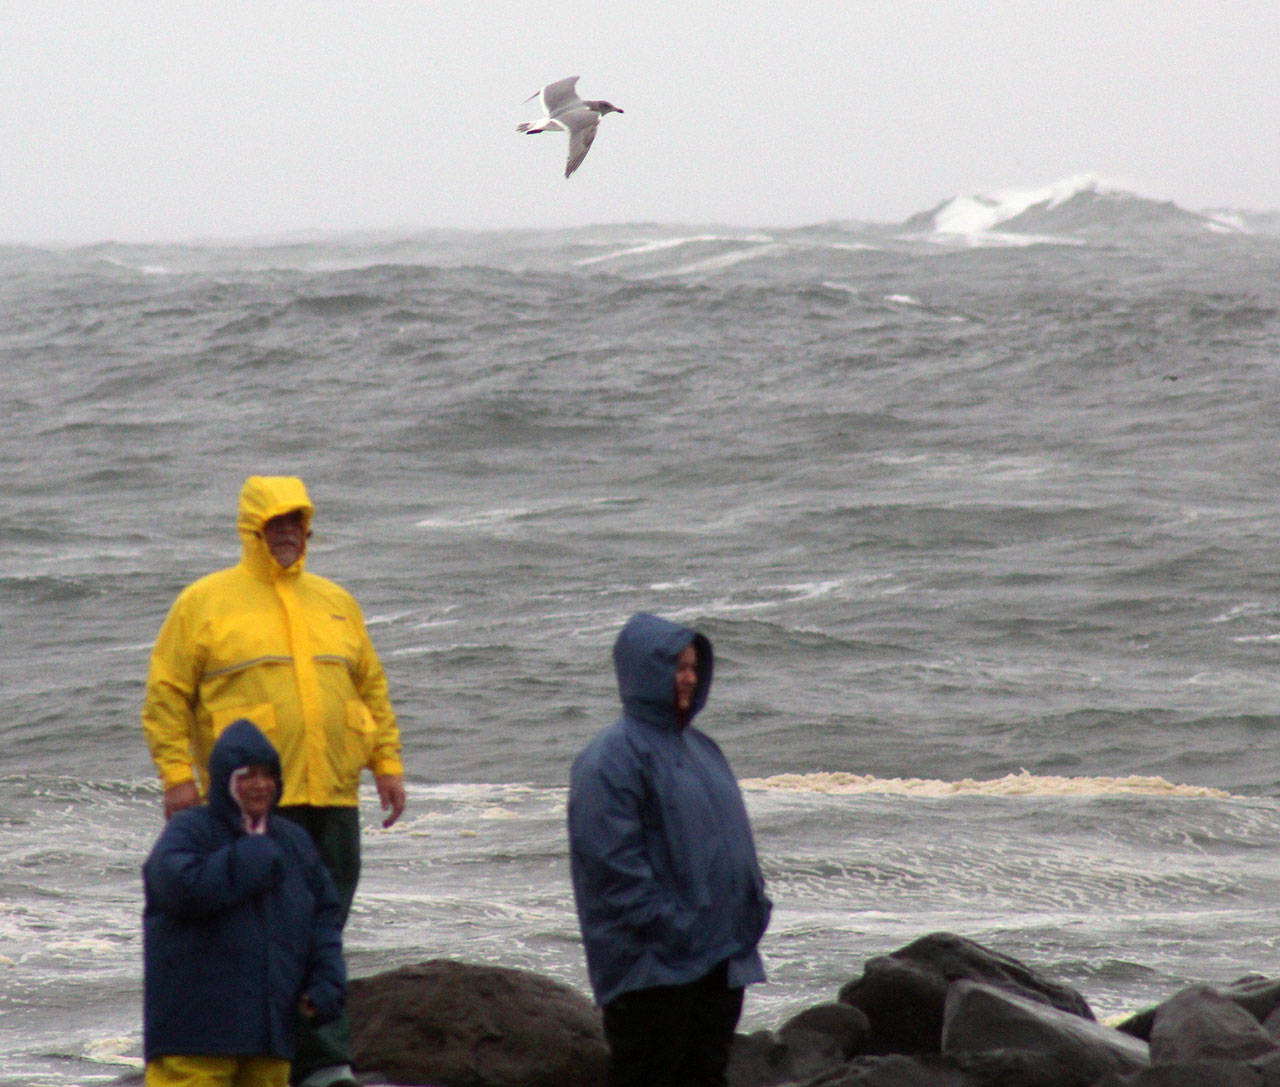 High wind warning as storms batter the coast